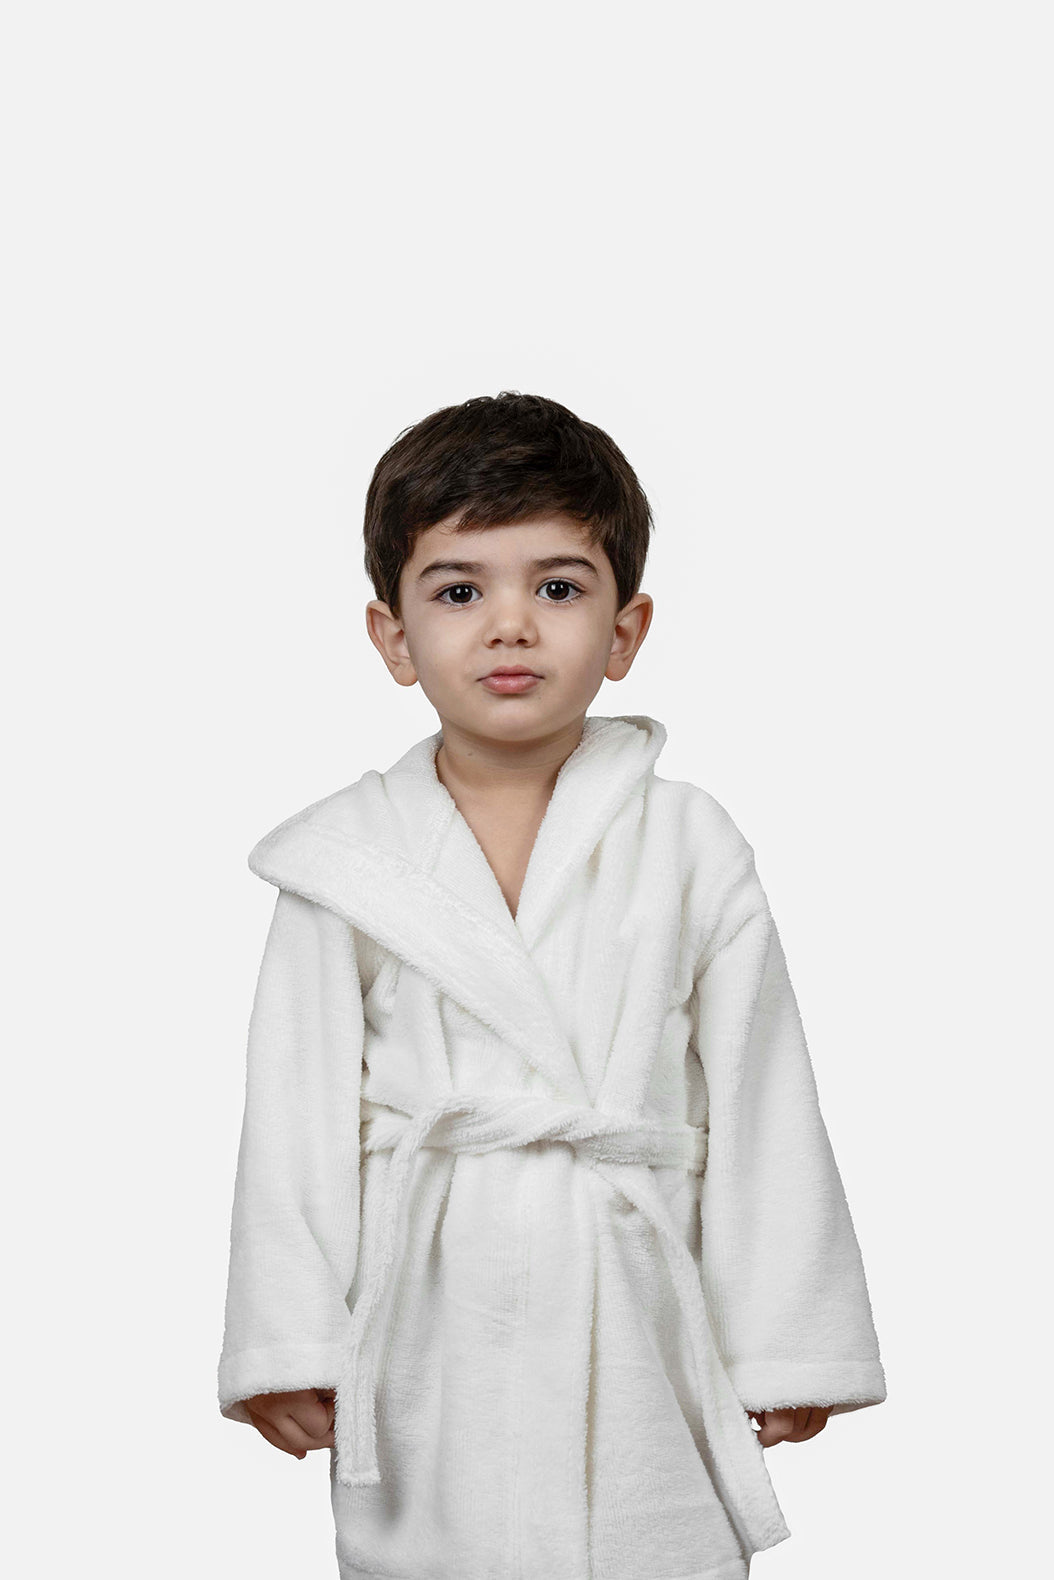 Luxurious Comfort for Kids